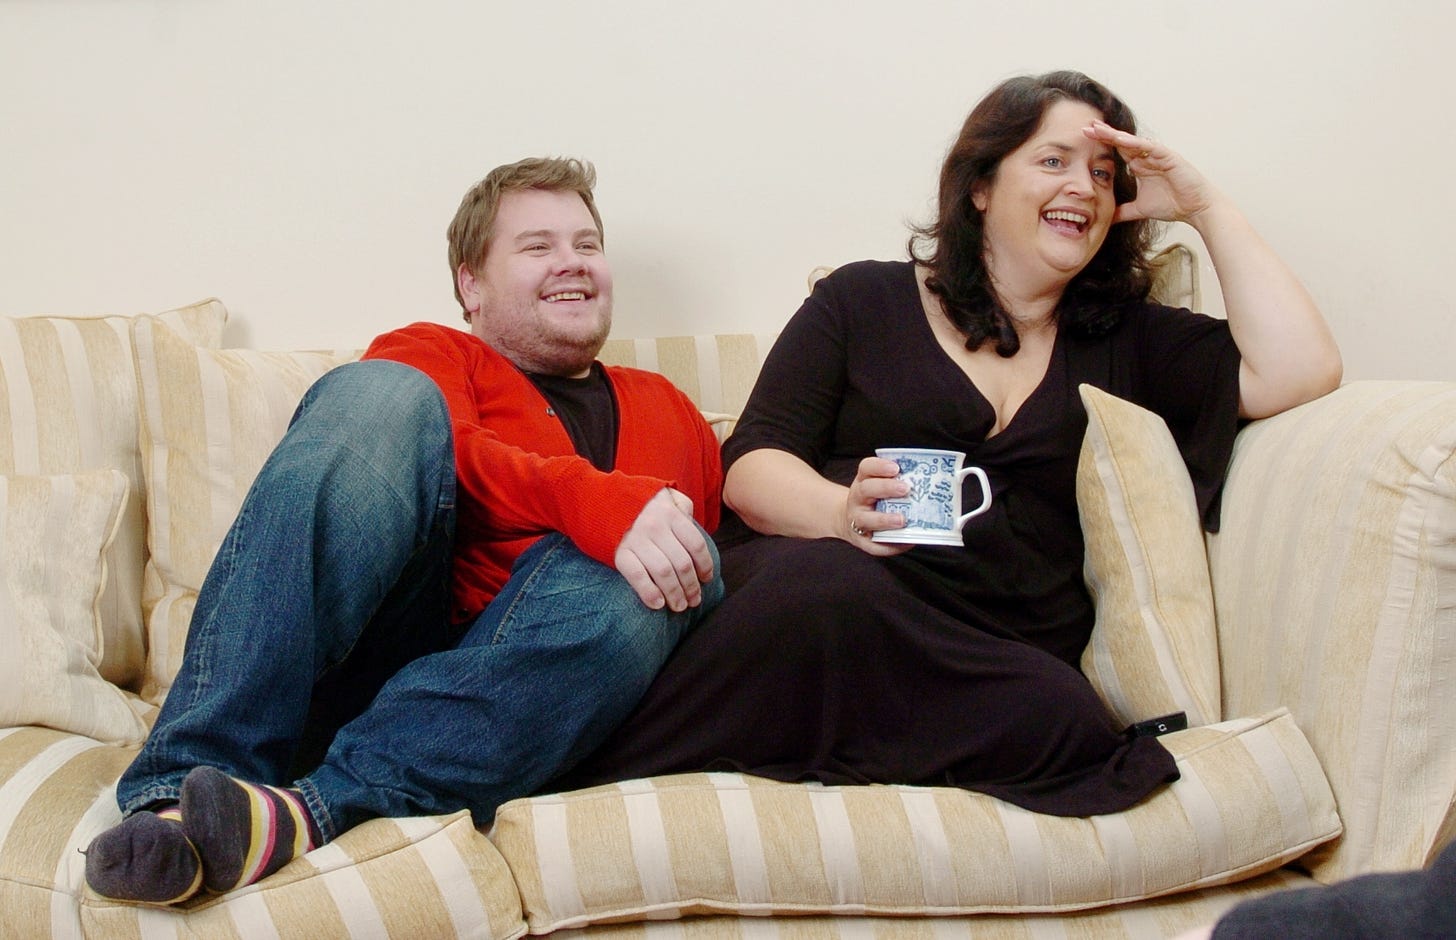 TEA FOR THREE: James Corden and Ruth Jones on the day they met Hannah back in 2009